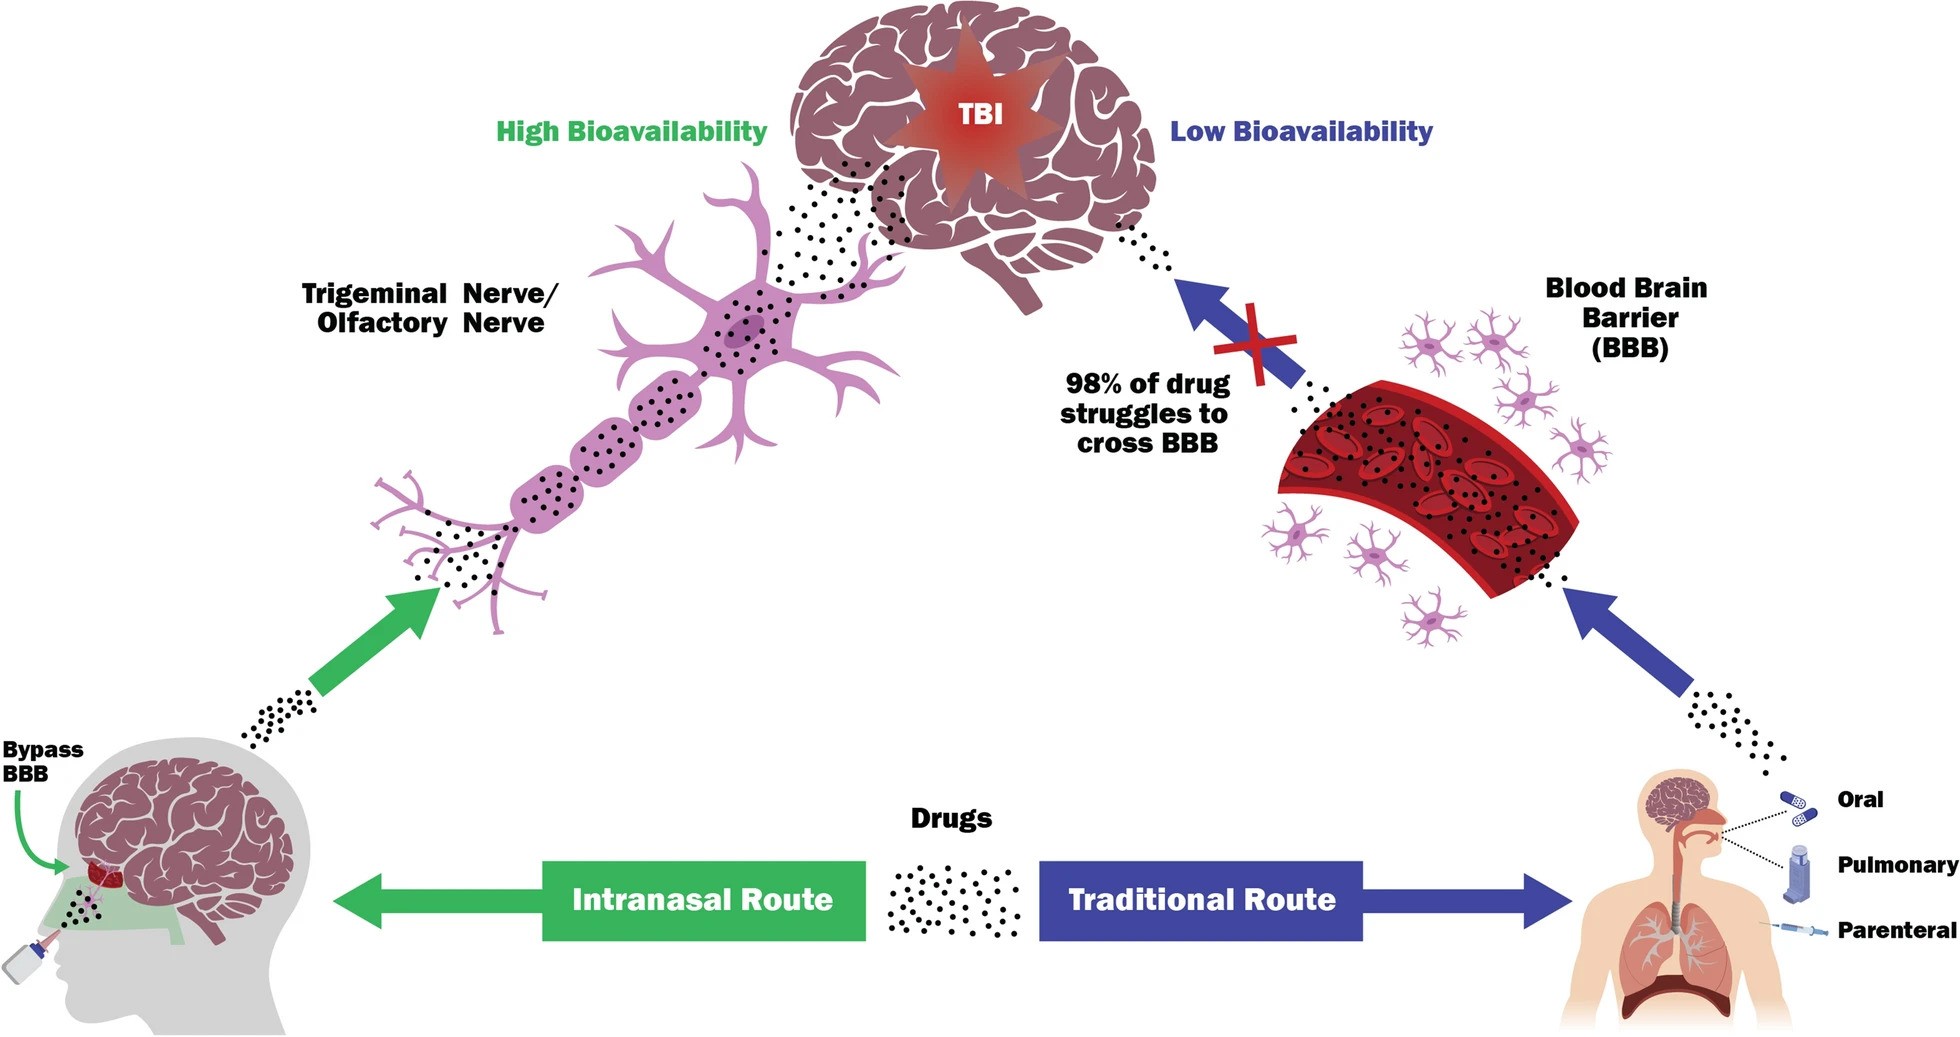 Intranasal Delivery of Mitochondria-Targeted Neuroprotective Drugs: A New Approach for Treating Traumatic Brain Injury